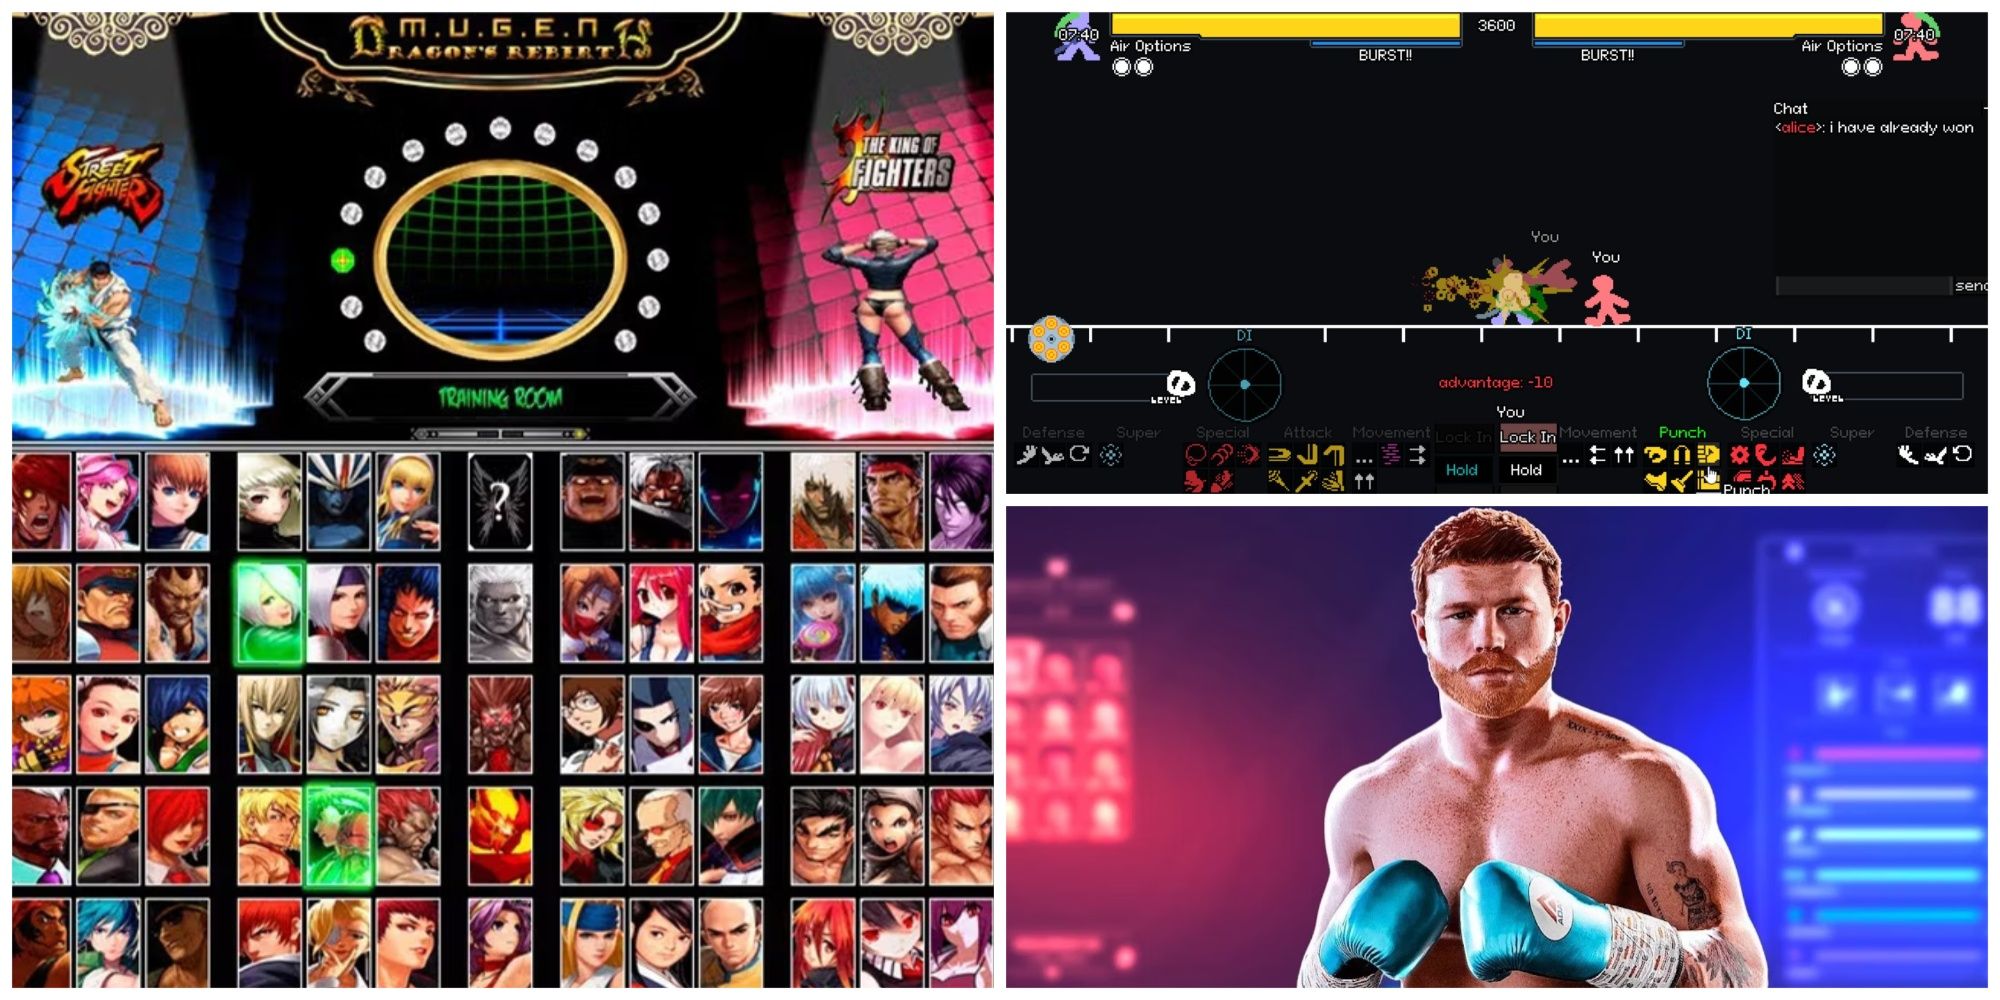 A collage image of MUGEN, Your Only Move is HUSTLE, and Canelo Alvarez from Undisputed